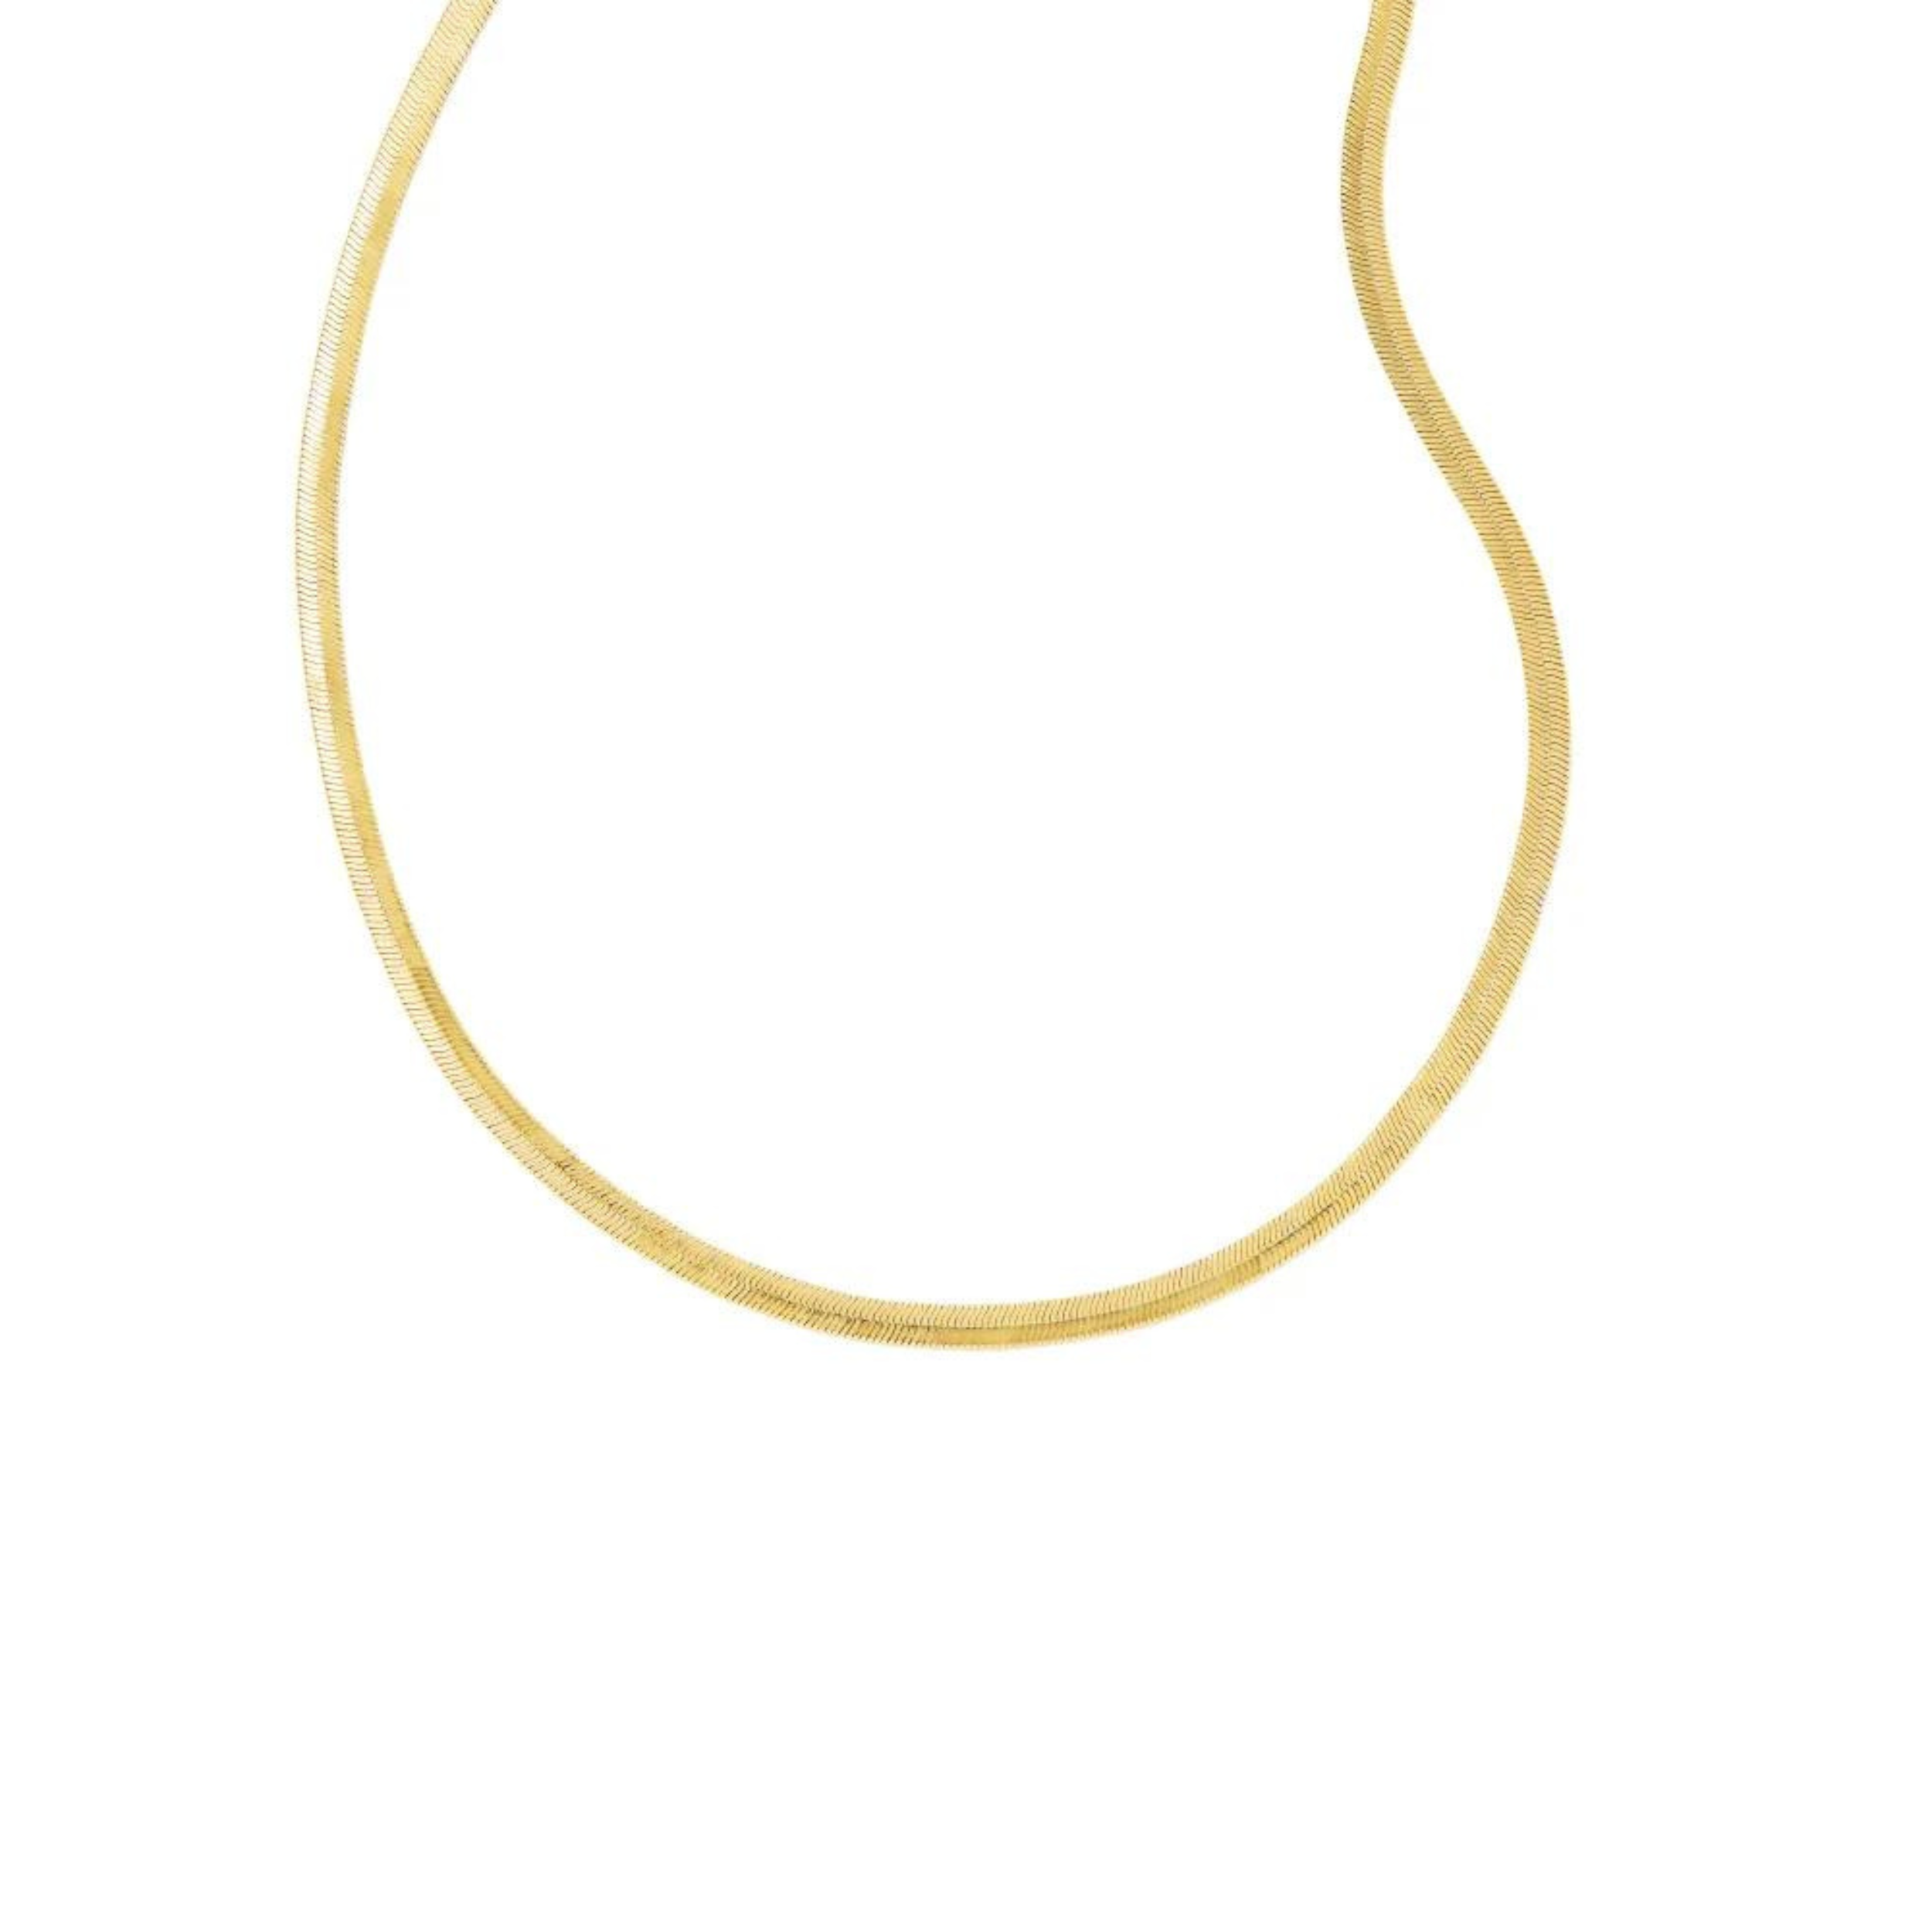 Pictured is a gold snake chain necklace on a white background.